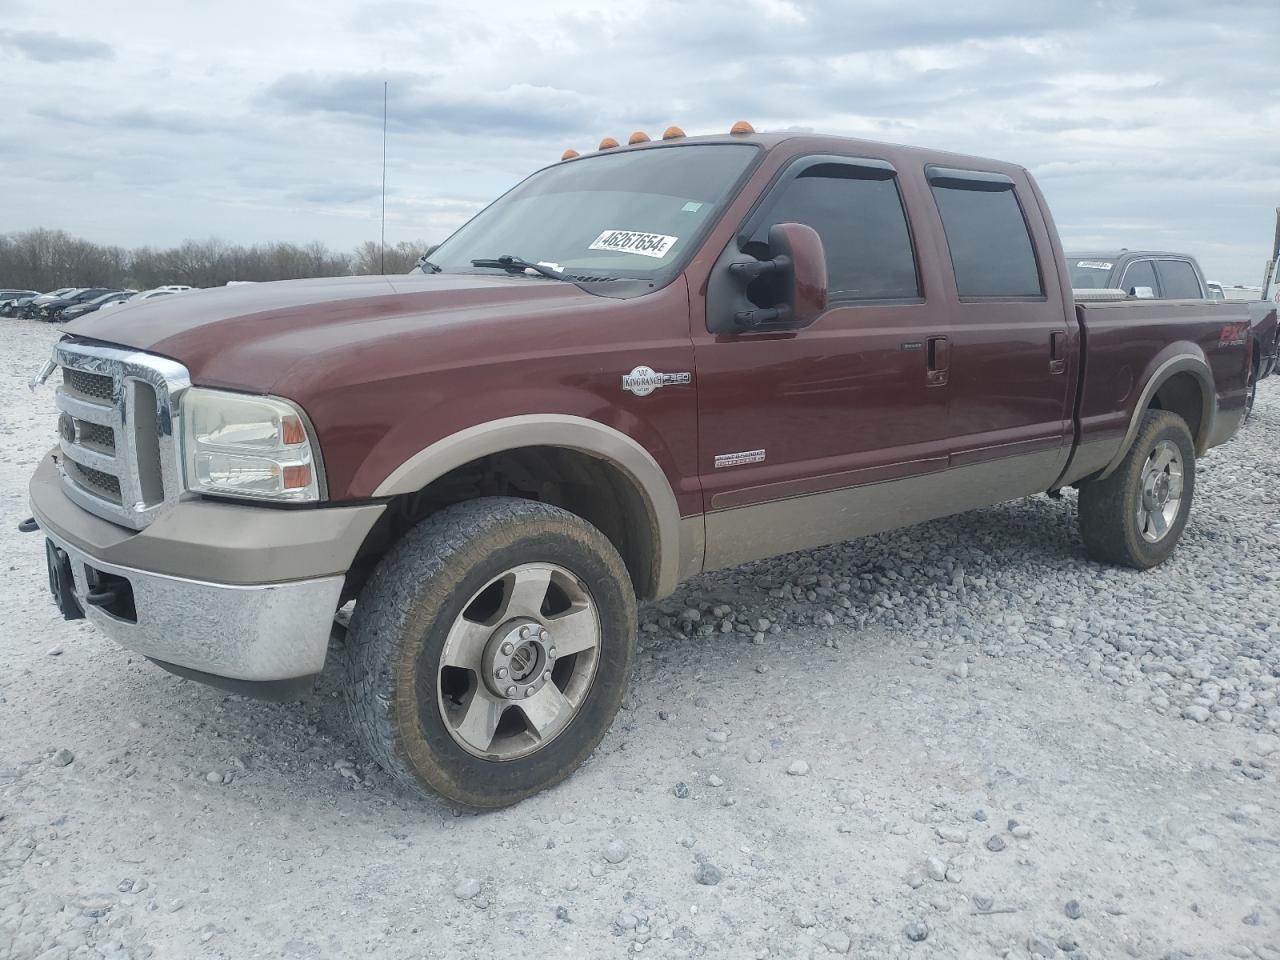 vin: 1FTSW21PX6EC29036 1FTSW21PX6EC29036 2006 ford f250 6000 for Sale in 72753 9334, Ar - Fayetteville, Prairie Grove, USA